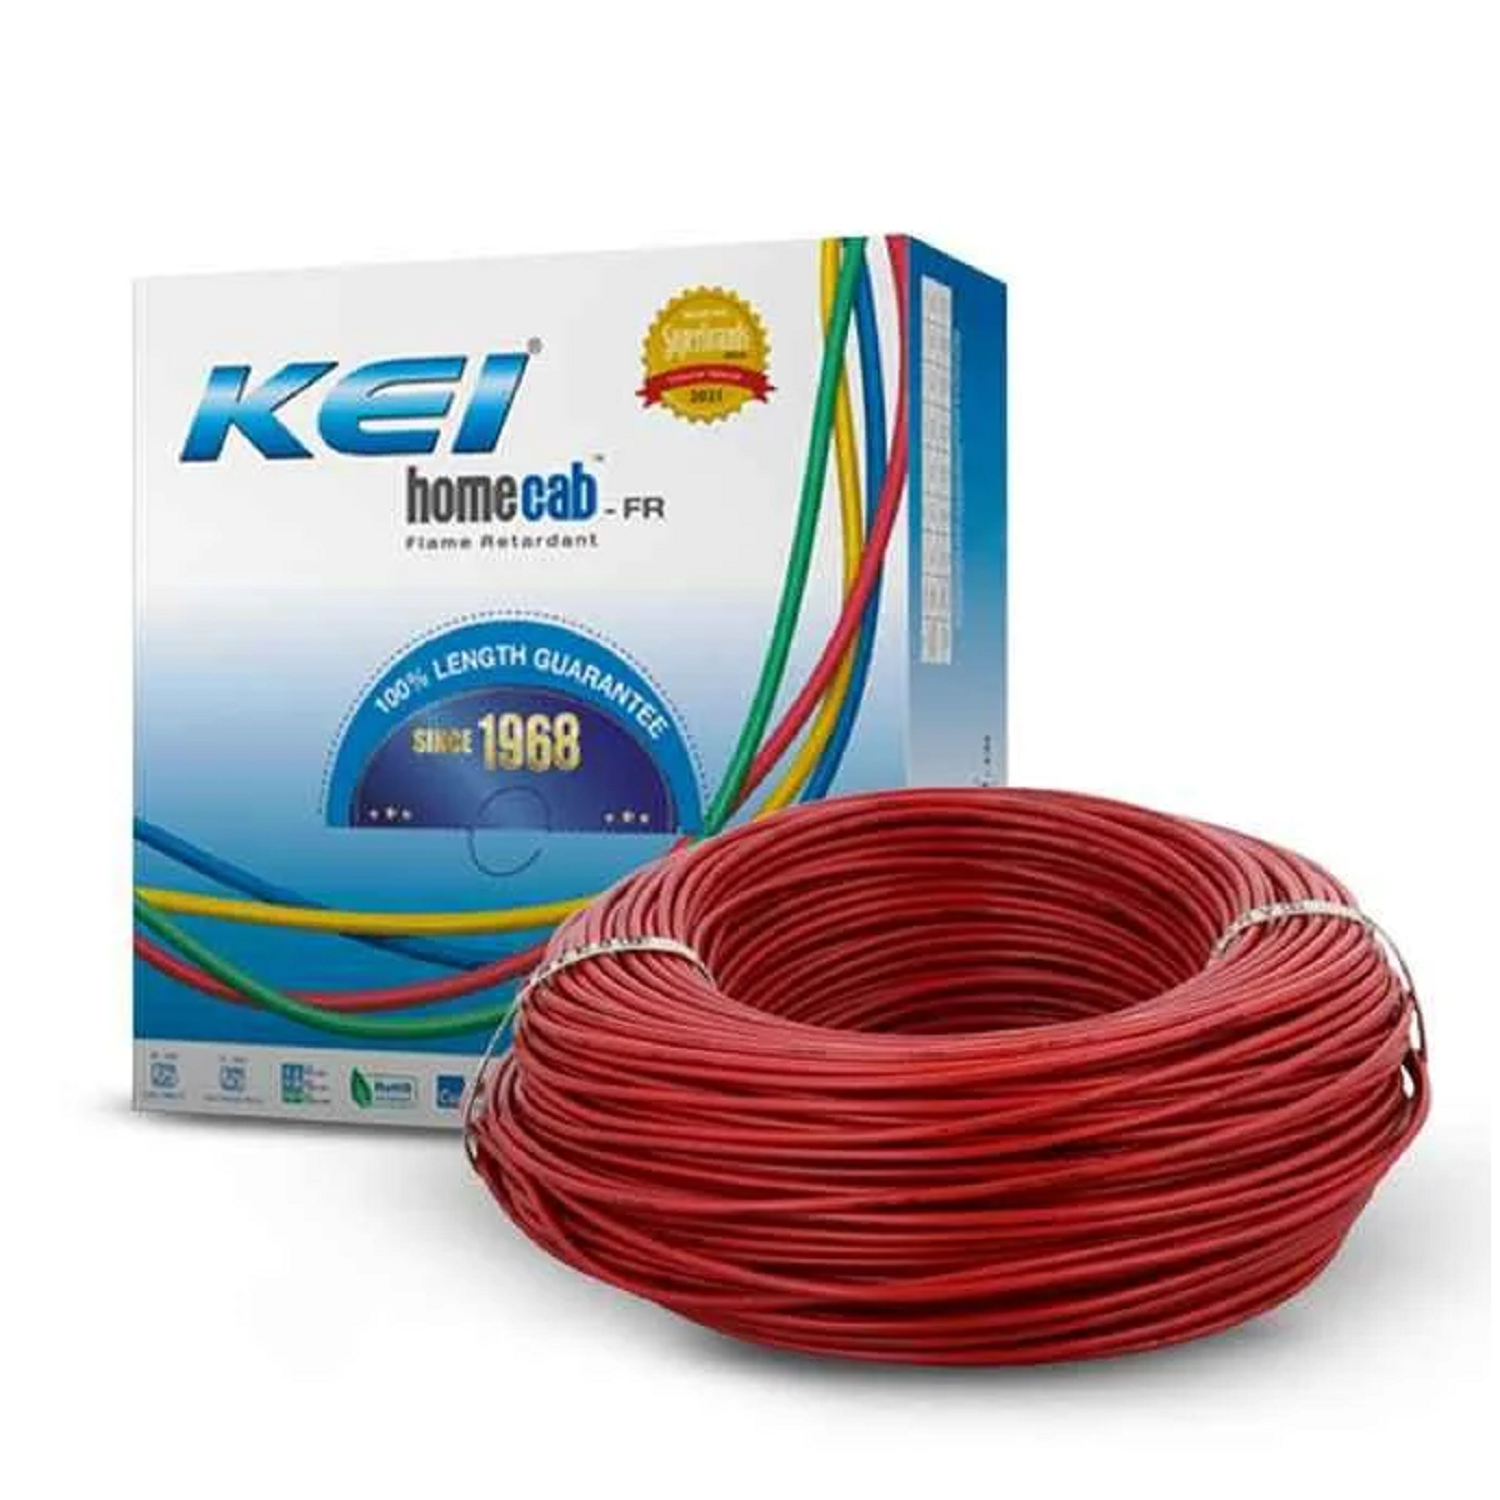 2.5 Sqmm KEI FR Single Core Copper Wire (90 Mtr) With PVC Insulated for House 38 Industrial Uses (Re